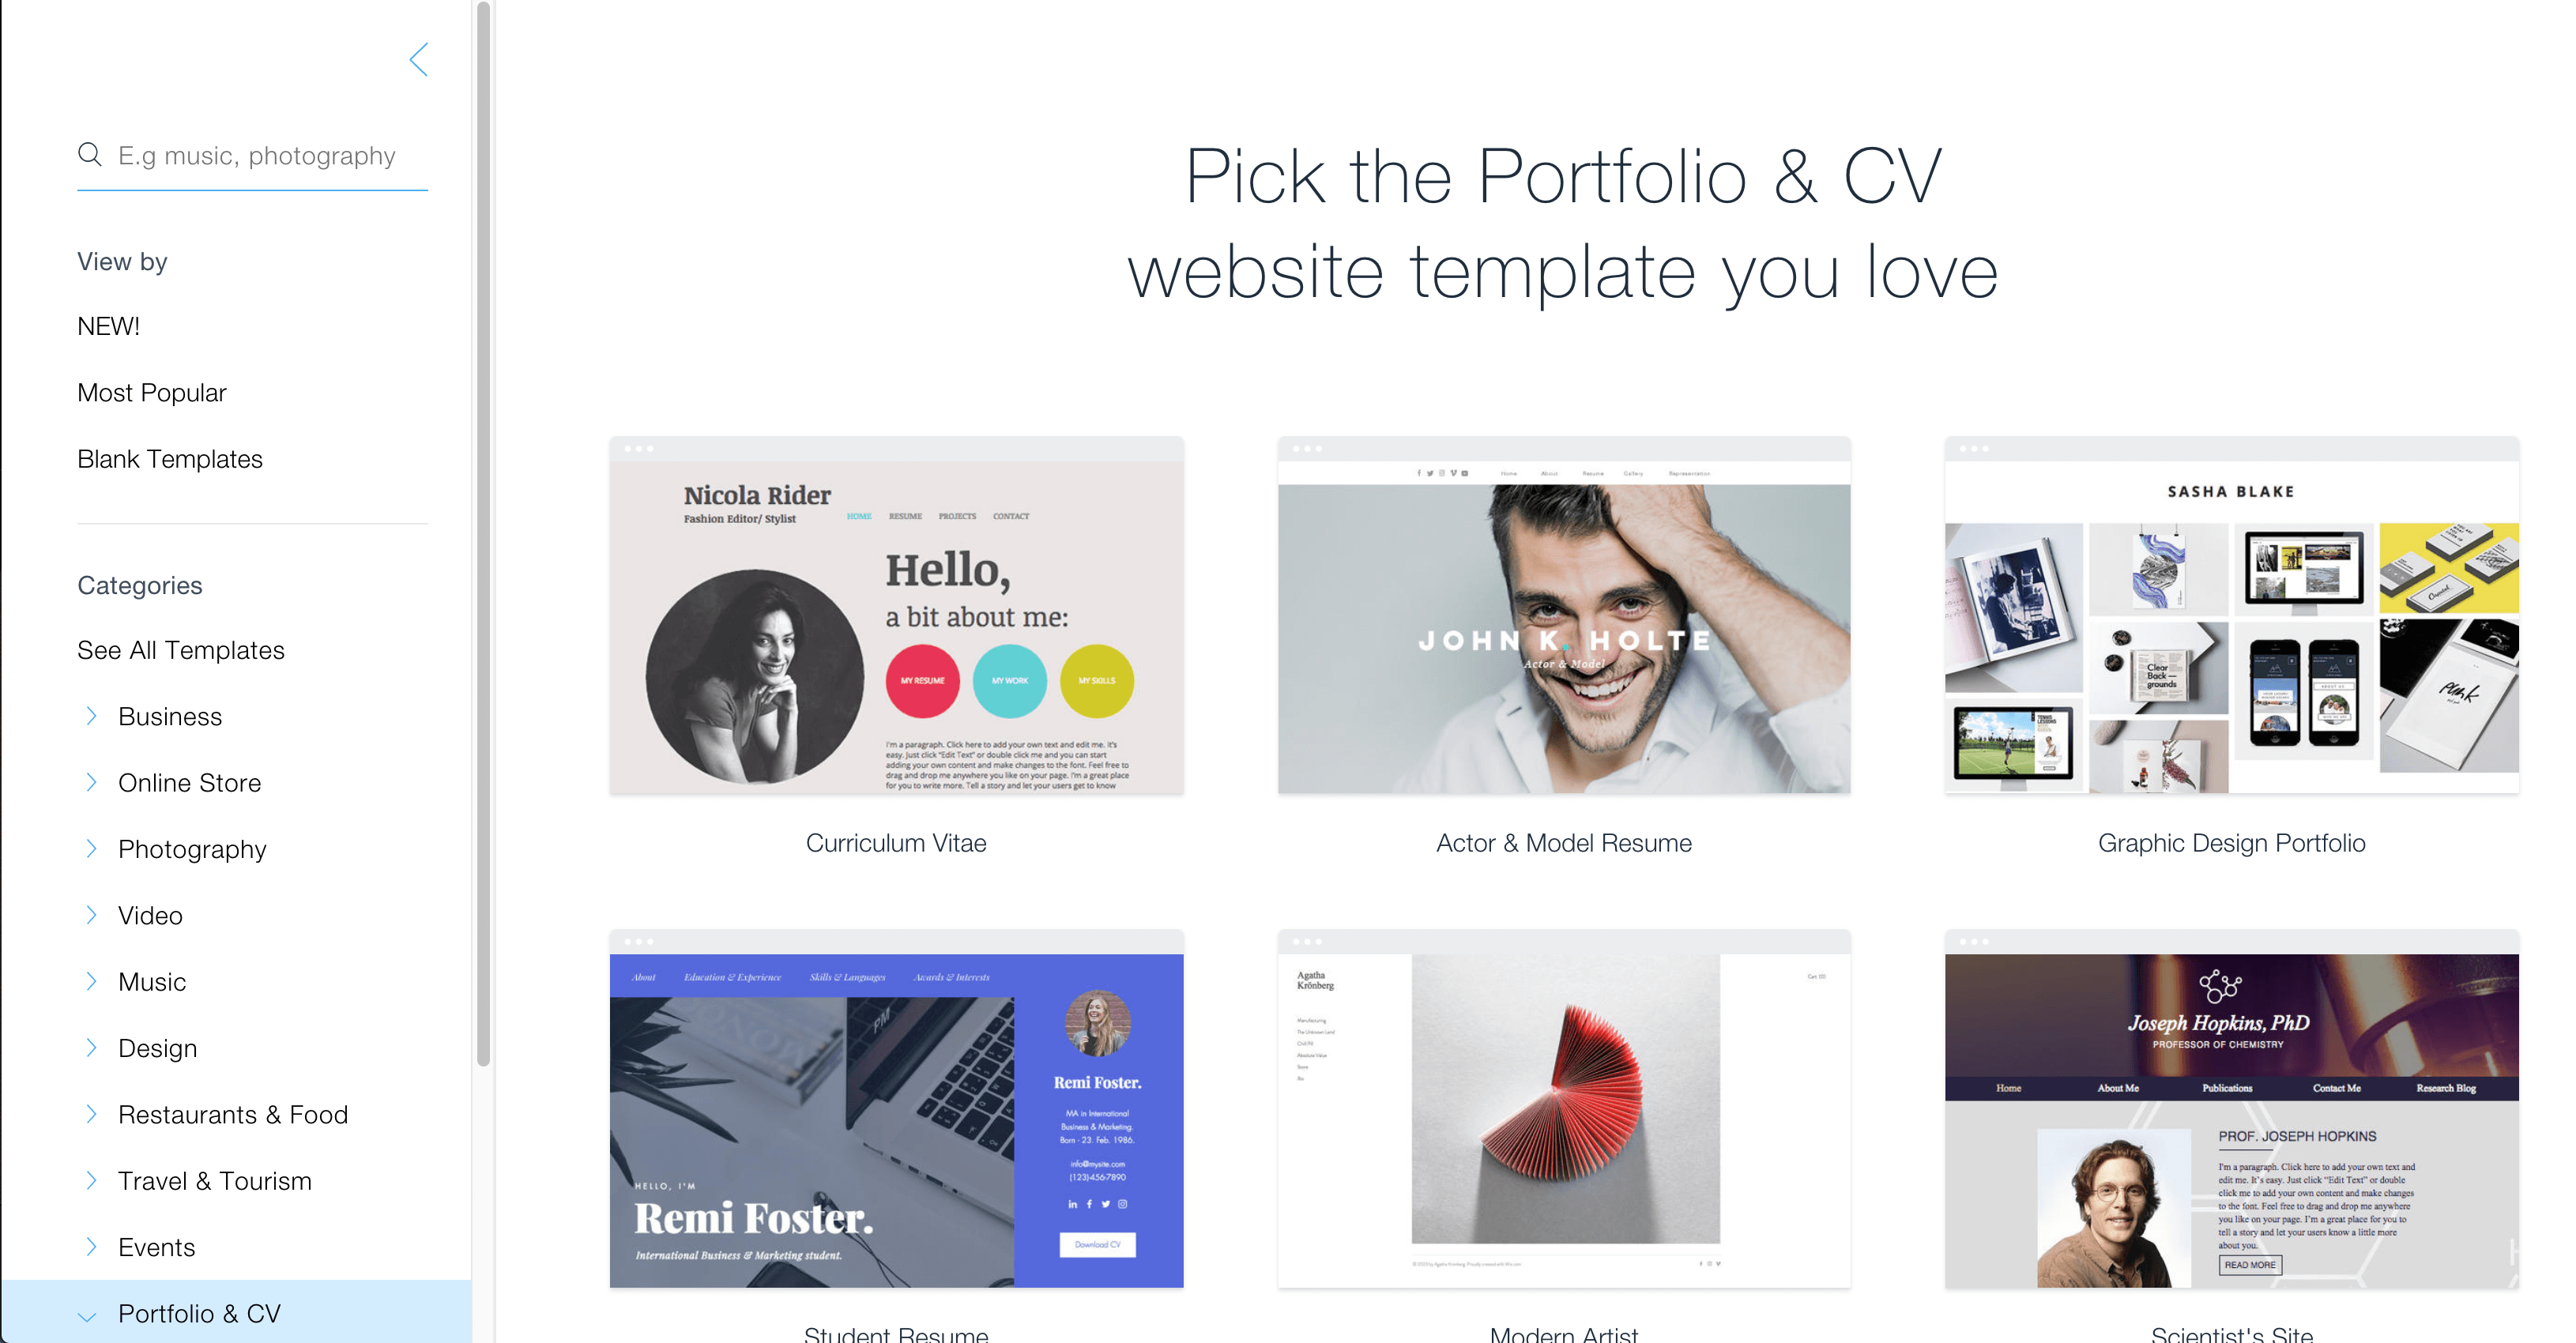 Available templates in Wix.